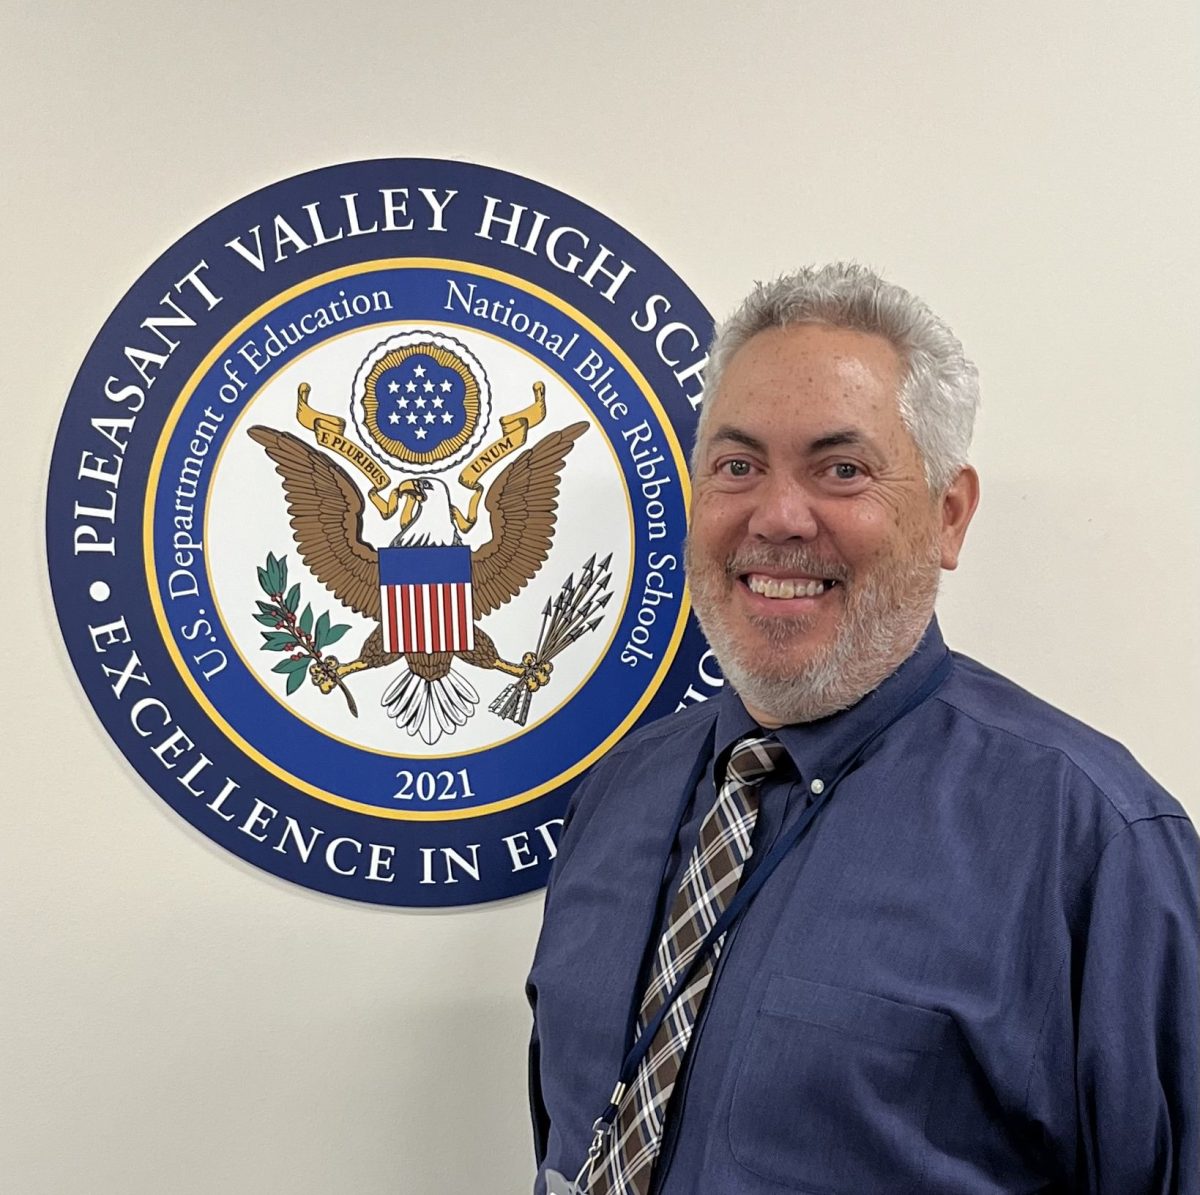 New principal Mike Hawley is excited to be a part of the Pleasant Valley School District